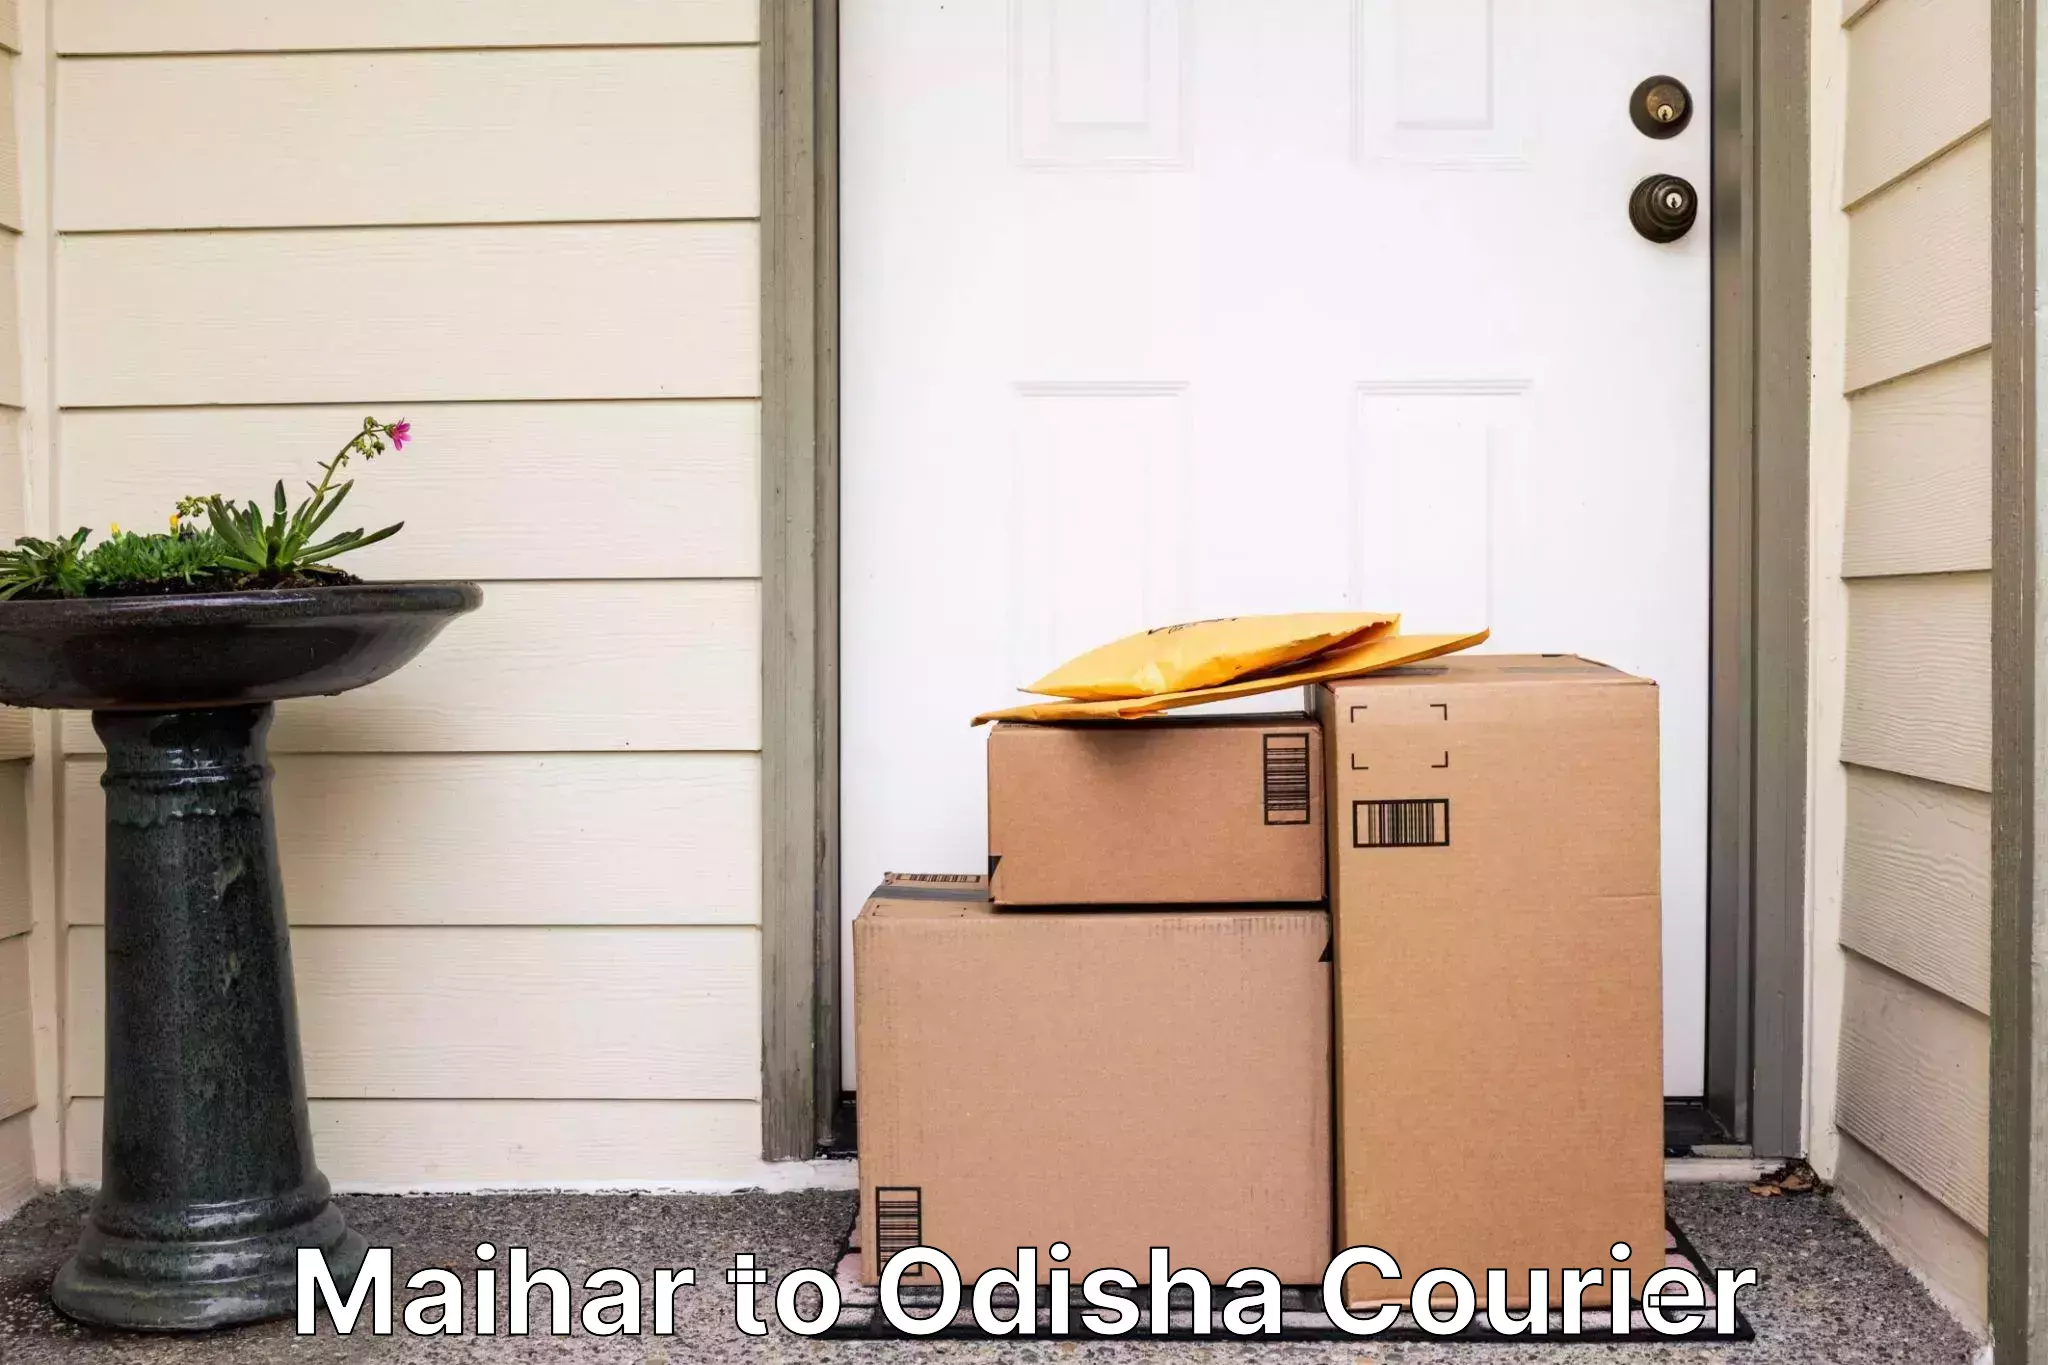 Same-day delivery solutions Maihar to Odisha